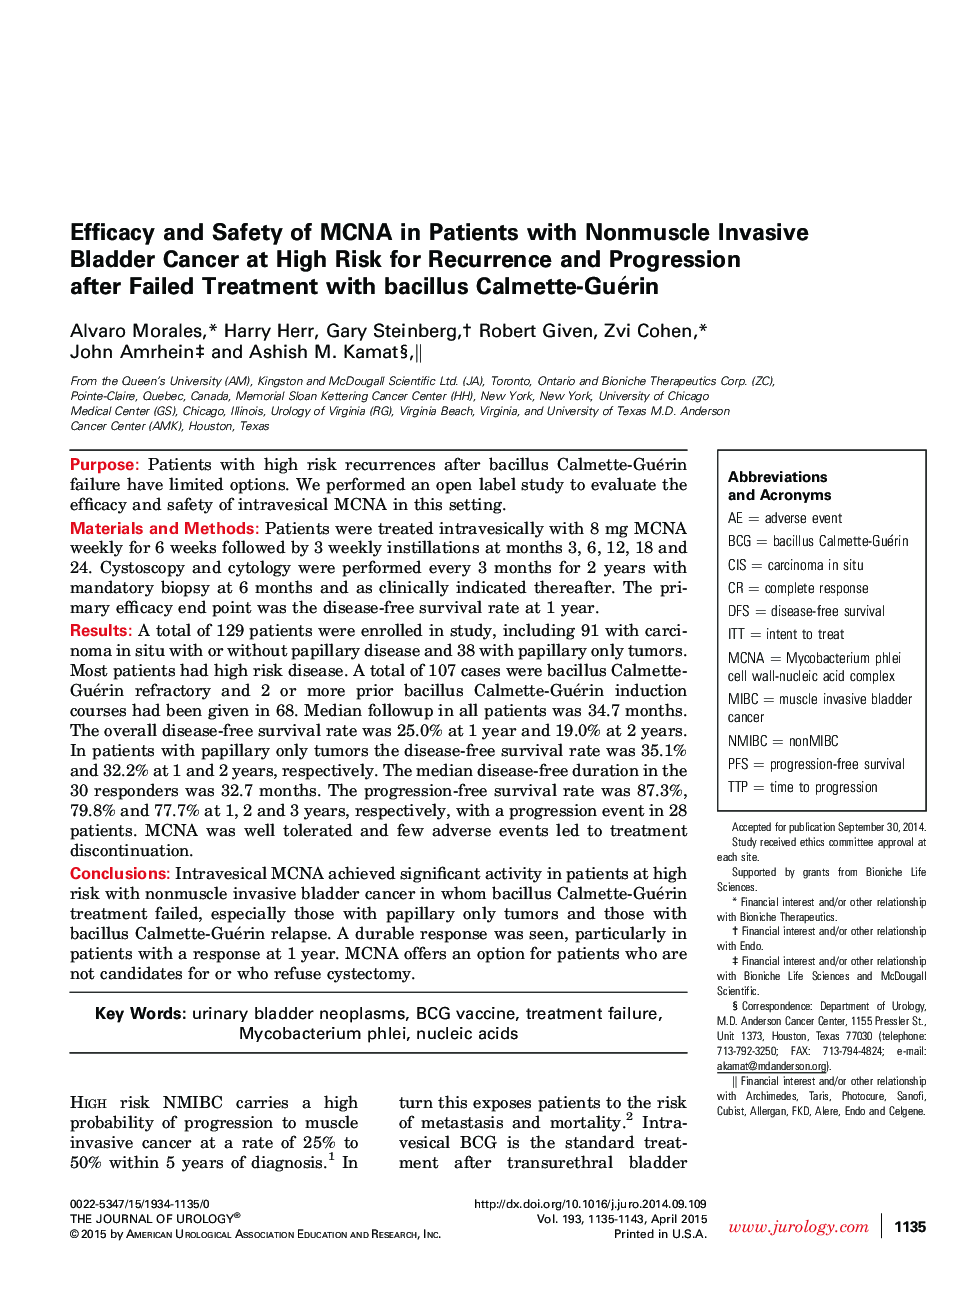 Efficacy and Safety of MCNA in Patients with Nonmuscle Invasive Bladder Cancer at High Risk for Recurrence and Progression after Failed Treatment with bacillus Calmette-Guérin 